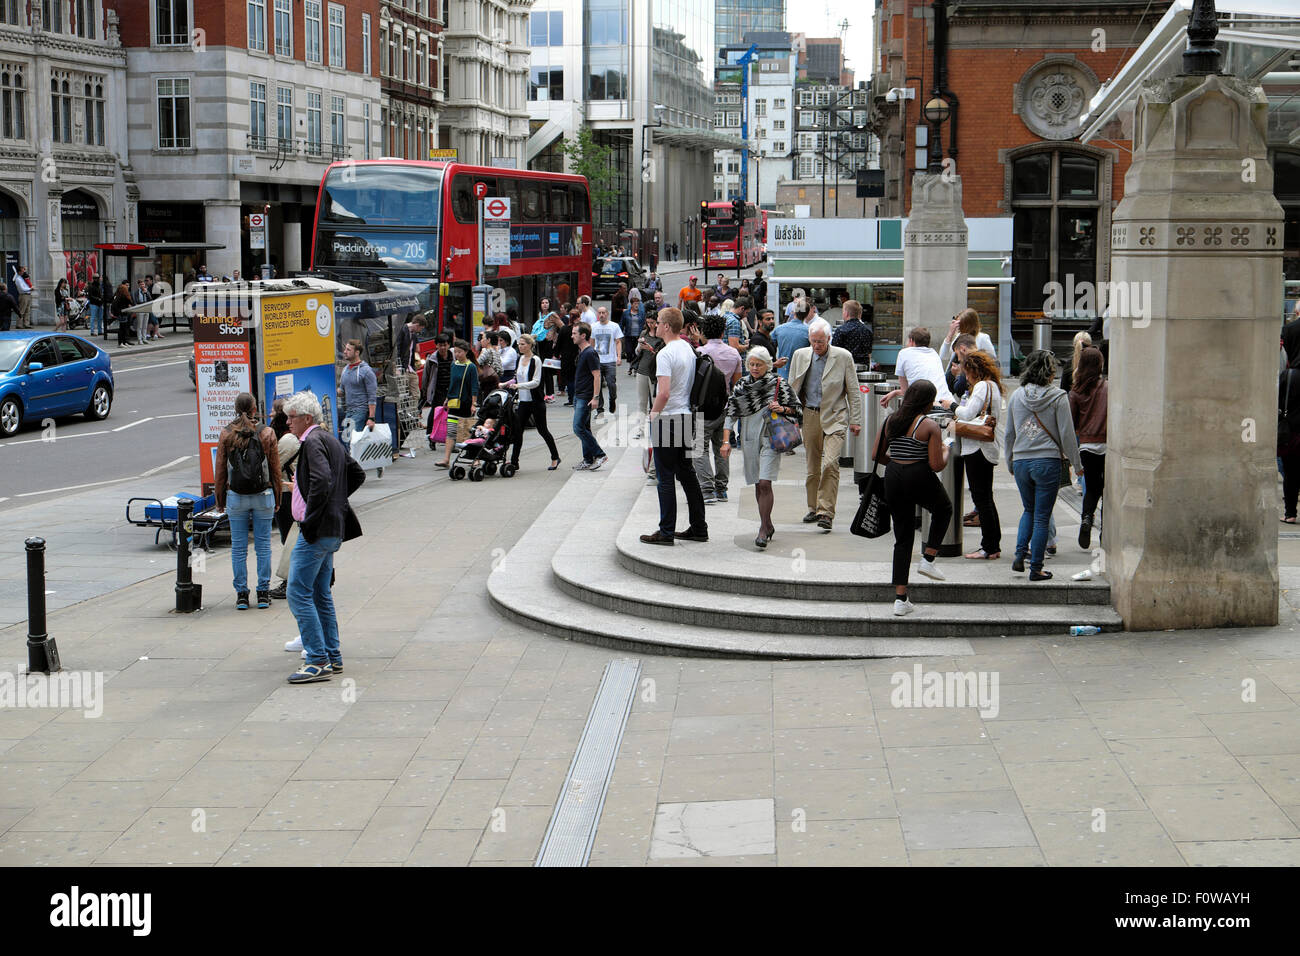 People in the street outside the entrance to  Liverpool Street Station in Bishopsgate London, UK   KATHY DEWITT Stock Photo